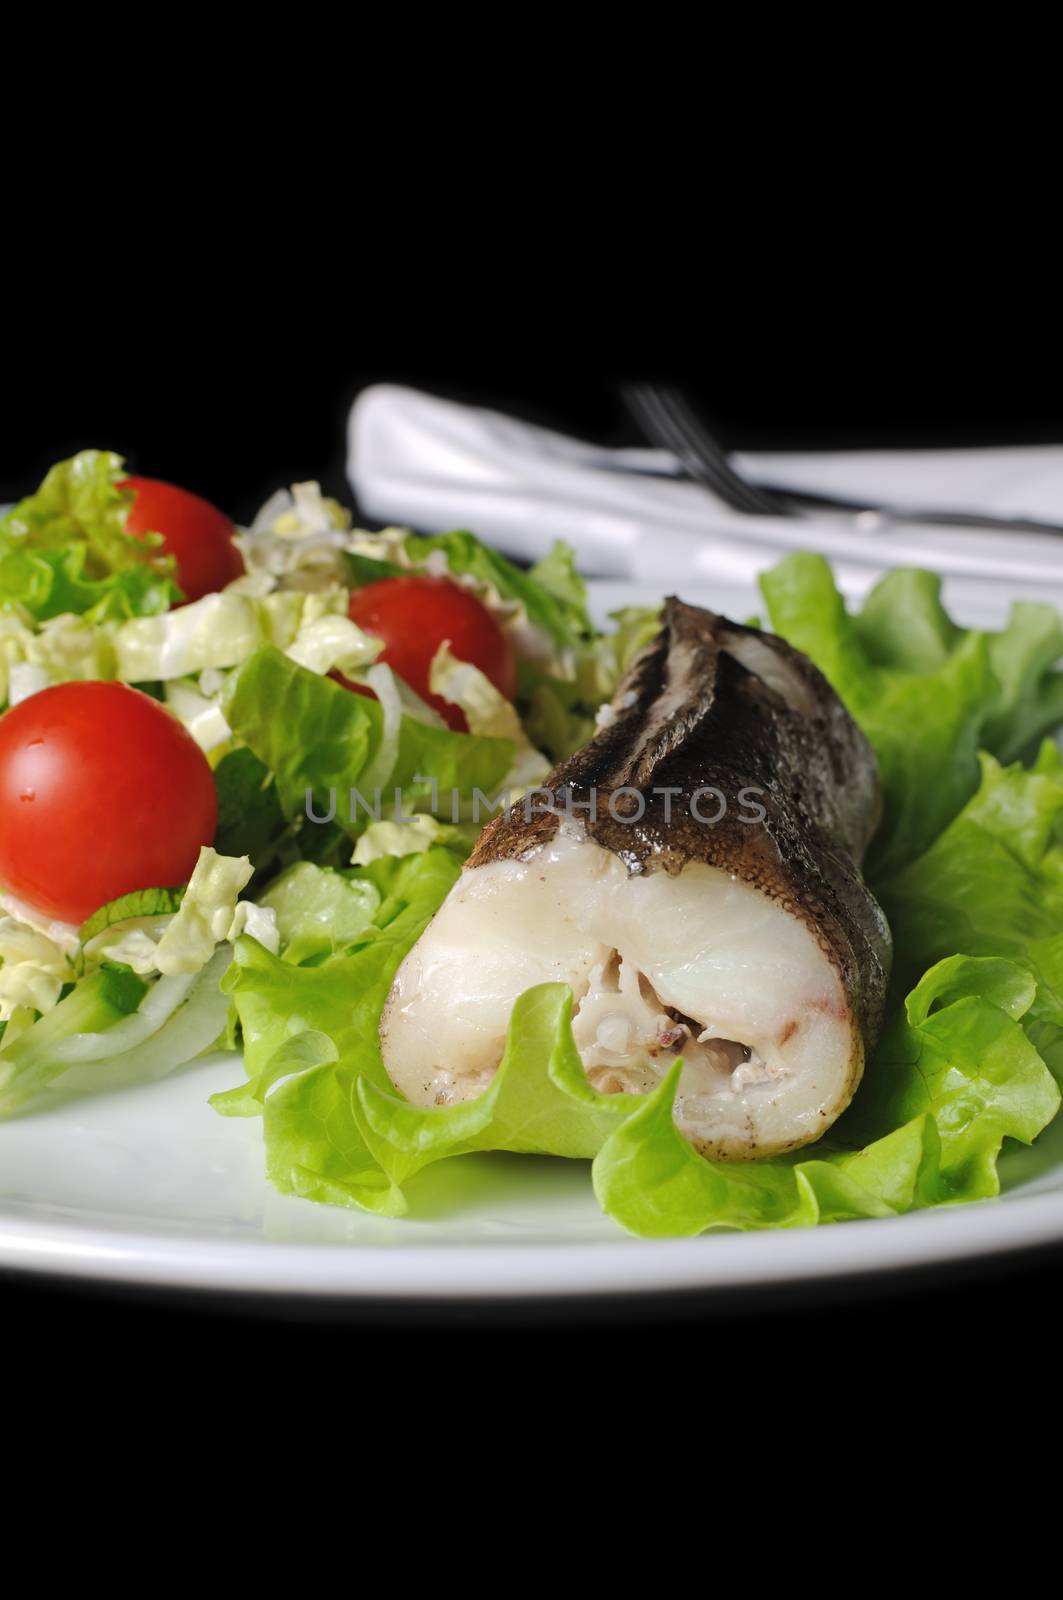 Baked fish (King clip) with vegetables by Apolonia